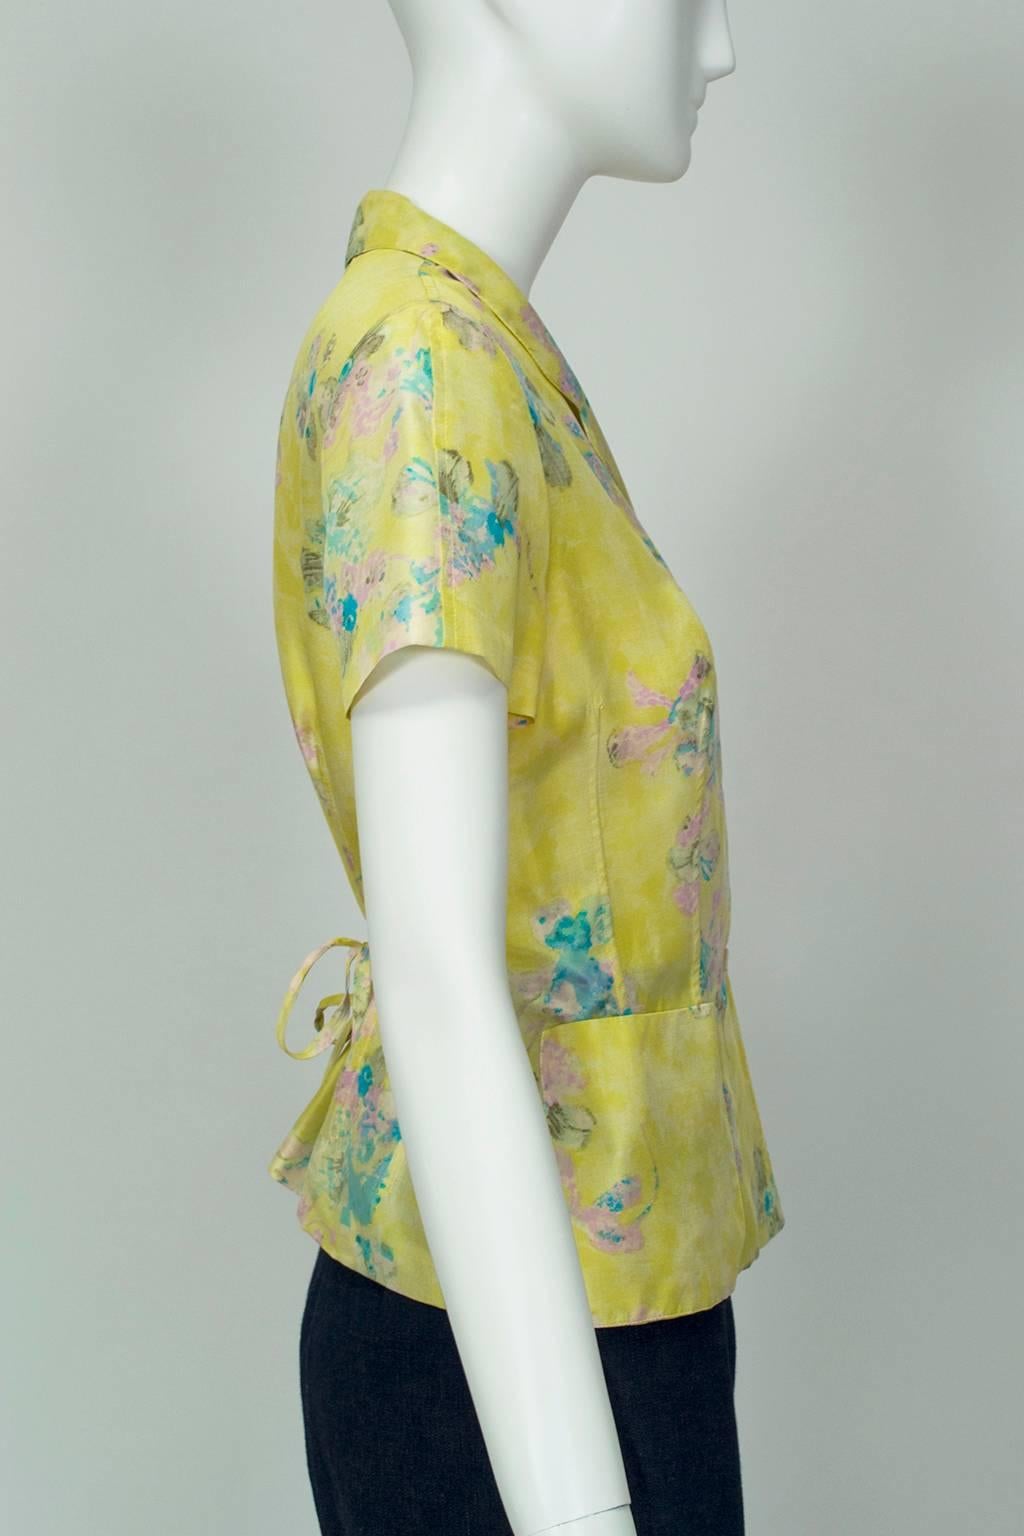 A blouse that delivers a breath of spring the moment it is put on, this button front shirt features rear waist ties for a peplum silhouette and adjustable waistline. The delicate yellow, purple and turquoise watercolor iris print is the perfect